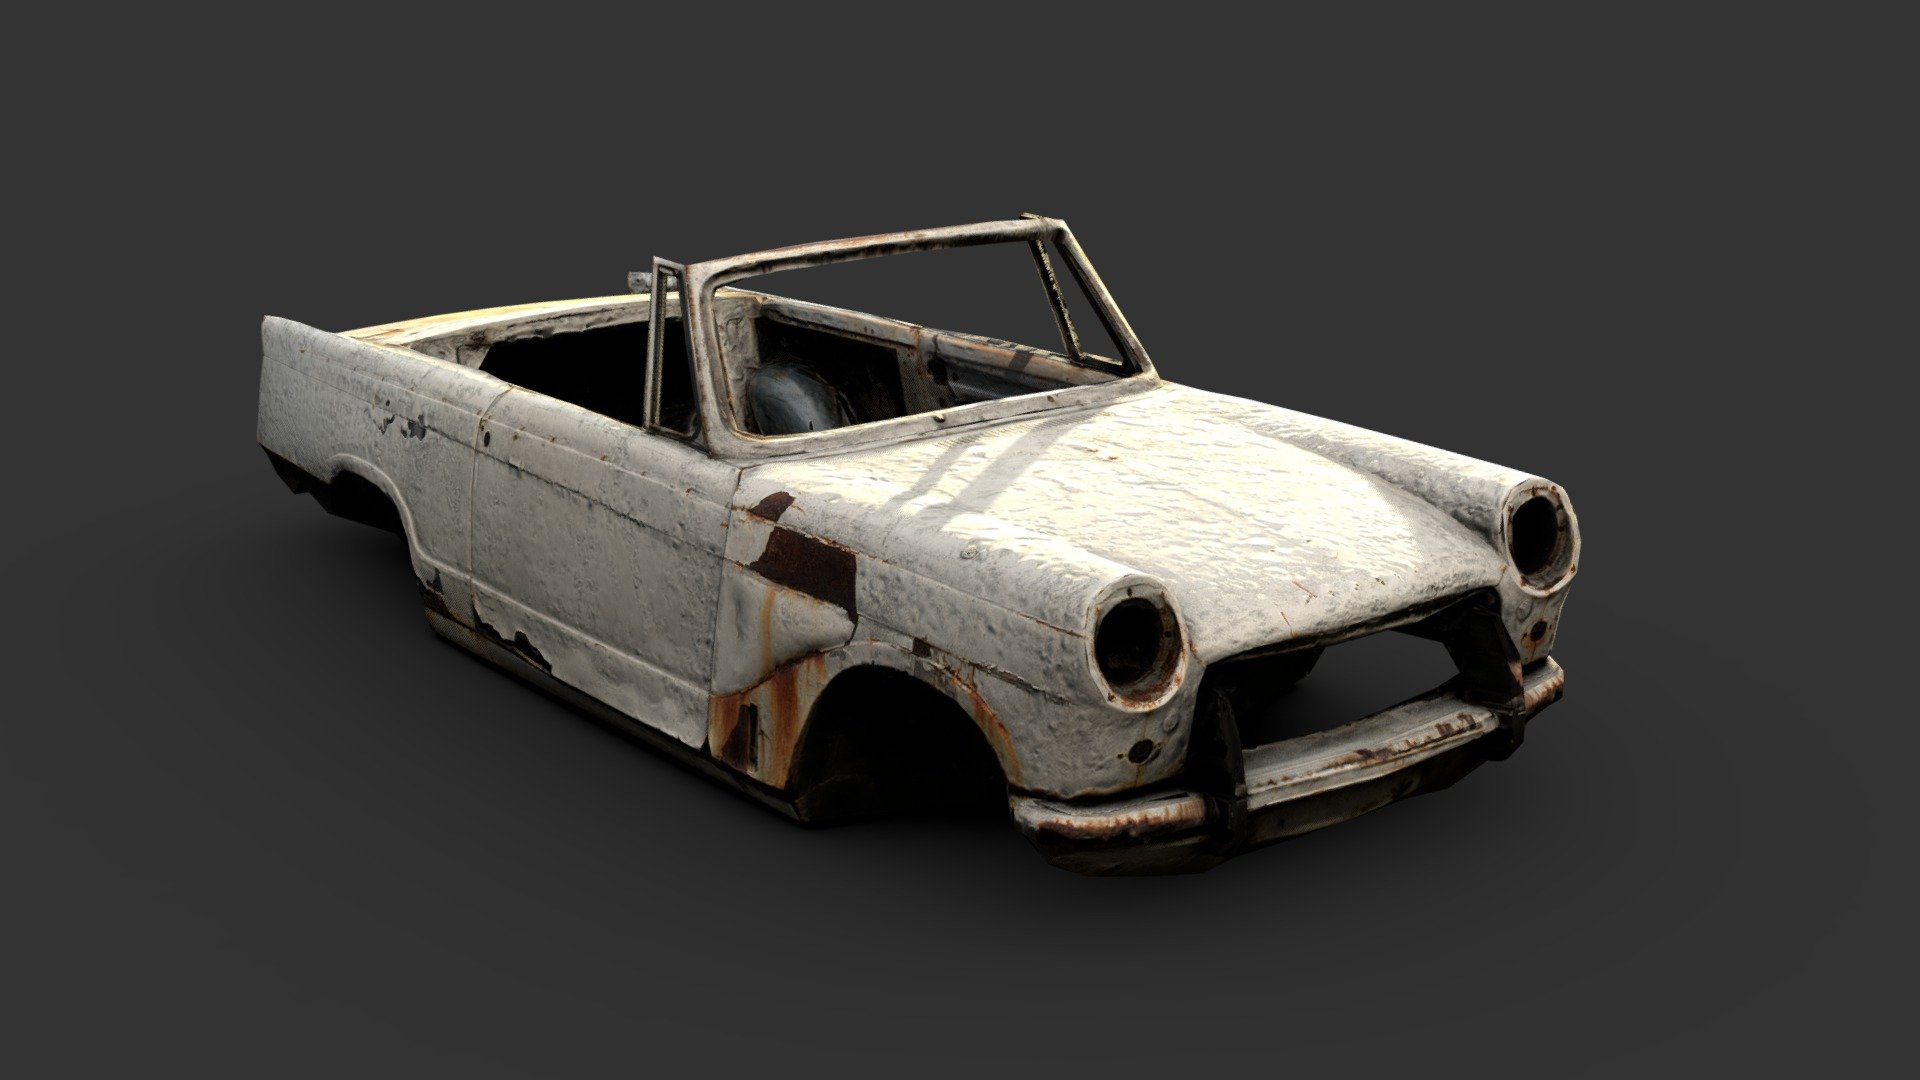 Retopologized version of a 3D scan, this was a small, british convertible once.

Made in Realitycapture, 3DSMax, Substance Painter, and Topogun - Triumph Herald Wreck - 3D model by Renafox (@kryik1023) 3d model